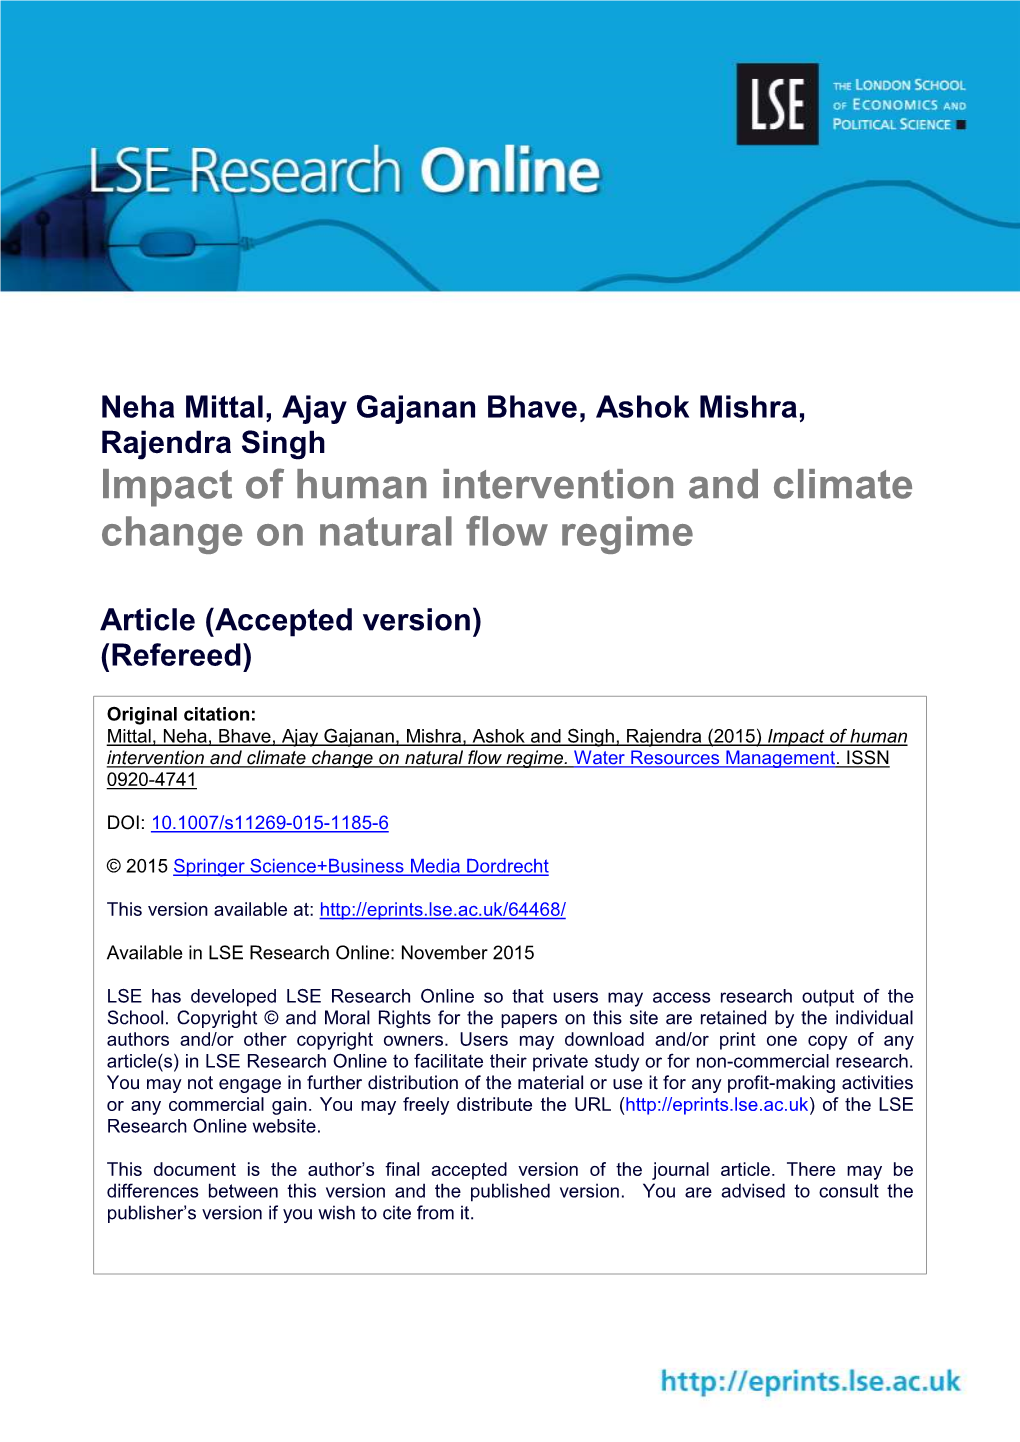 Impact of Human Intervention and Climate Change on Natural Flow Regime